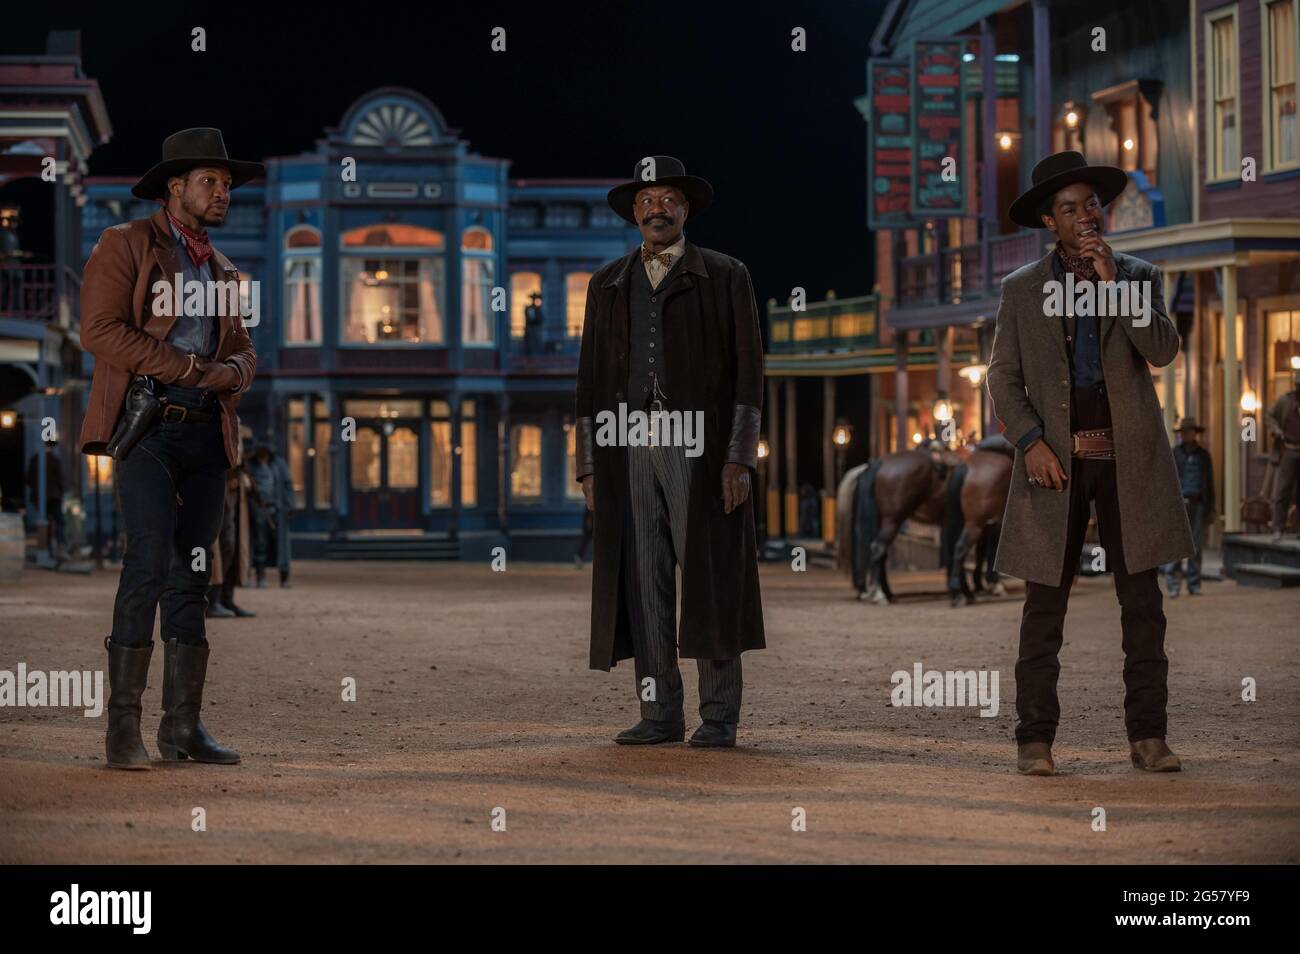 RELEASE DATE: 2021 TITLE: The Harder They Fall STUDIO: Netflix DIRECTOR: Jeymes Samuel PLOT: When an outlaw discovers his enemy is being released from prison, he reunites his gang to seek revenge in this Western. STARRING: JONATHAN MAJORS as Nat Love, DELROY LINDO, RJ CYLER as Jim Beckworth. (Credit Image: © Netflix/Entertainment Pictures) Stock Photo